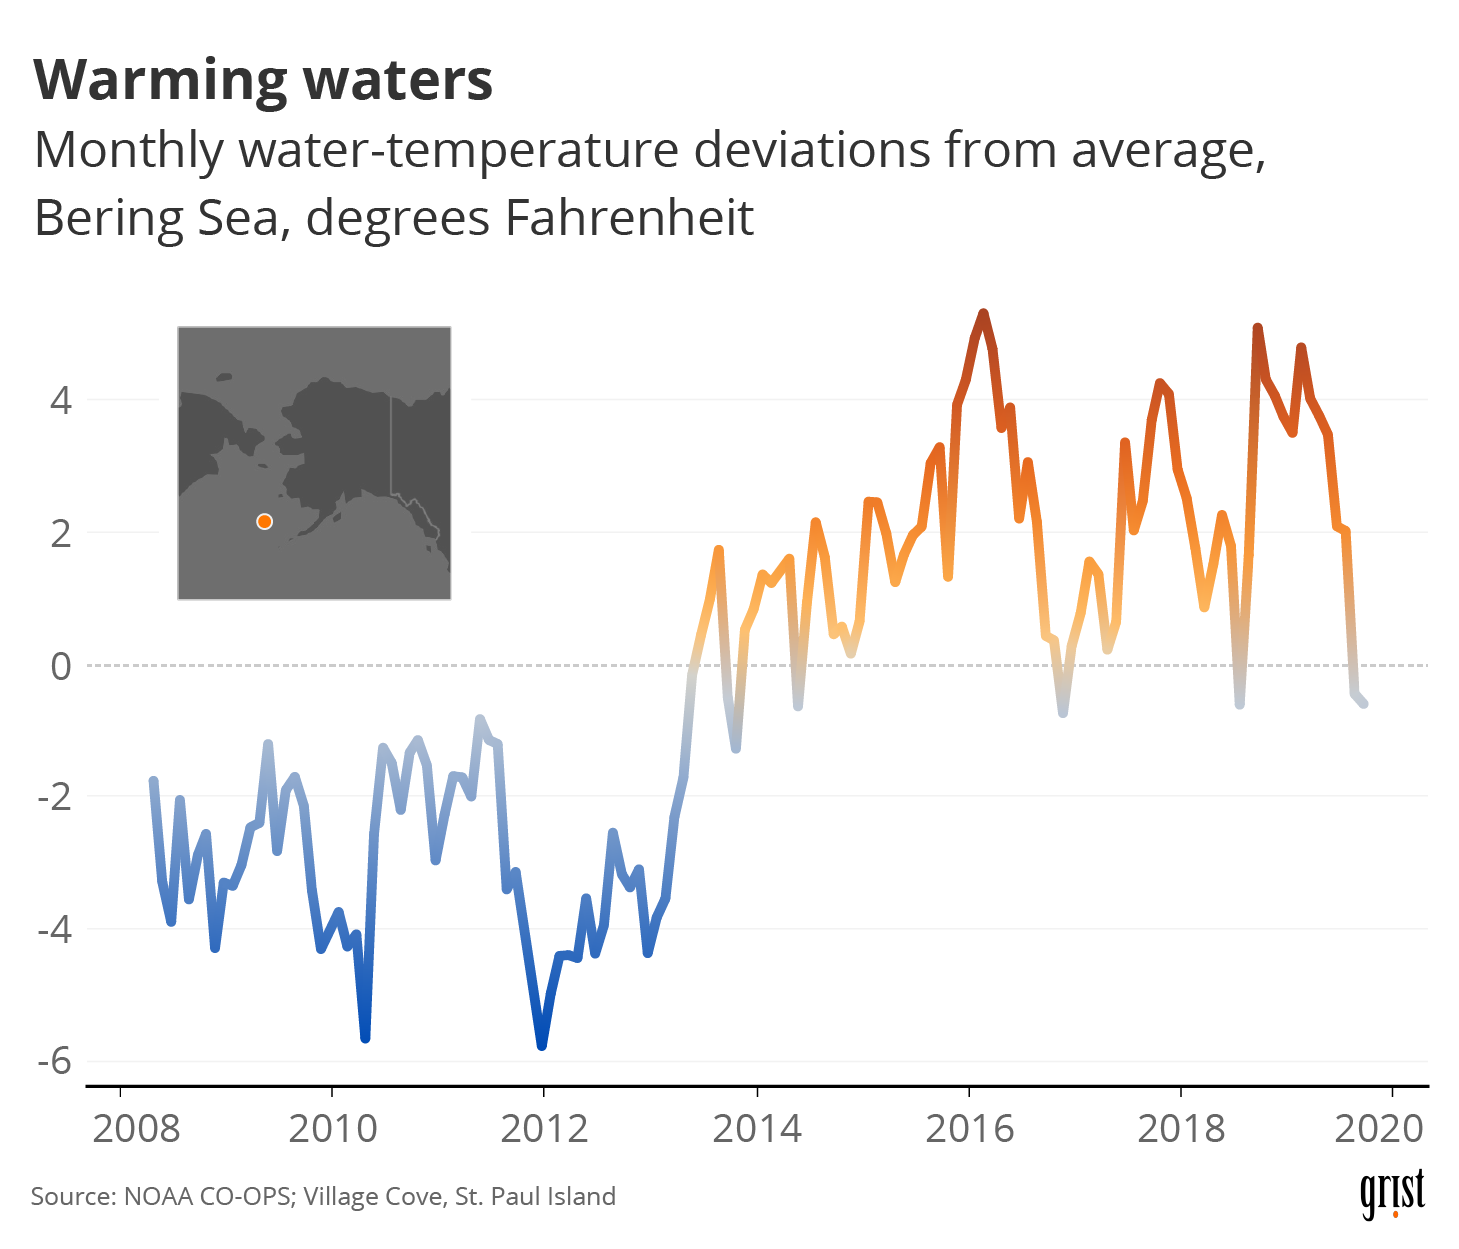 A line chart showing rising water-temperature deviations from average in the Bering Sea. Recent water temperatures are about 4 degrees Fahrenheit above average. An inset map shows the location of the Bering Sea, off the southwest coast of Alaska.